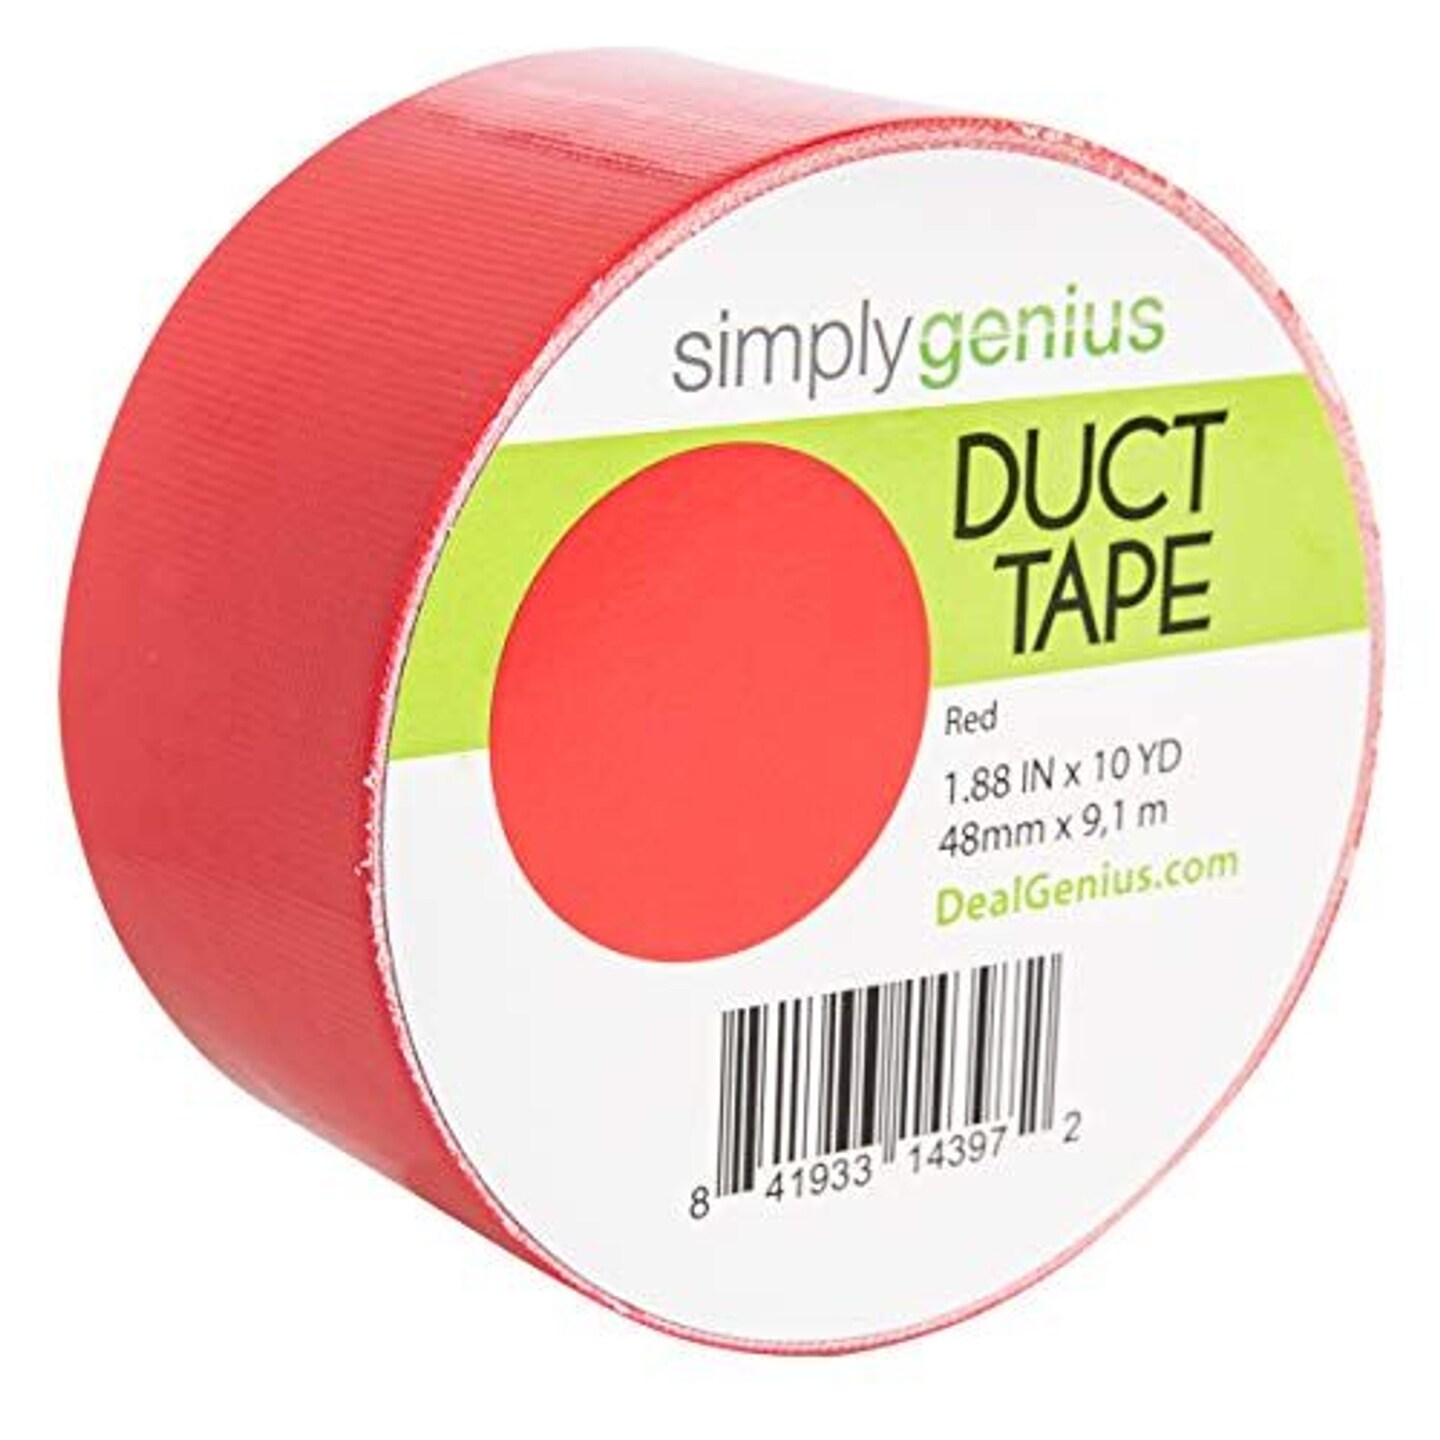 Simply Genius Art &#x26; Craft Duct Tape Heavy Duty - Craft Supplies for Adults - Colored Duct Tape - 1.8 in x 10 yards - Colorful Tape for DIY, Craft &#x26; Home Improvement (Red, Single roll)